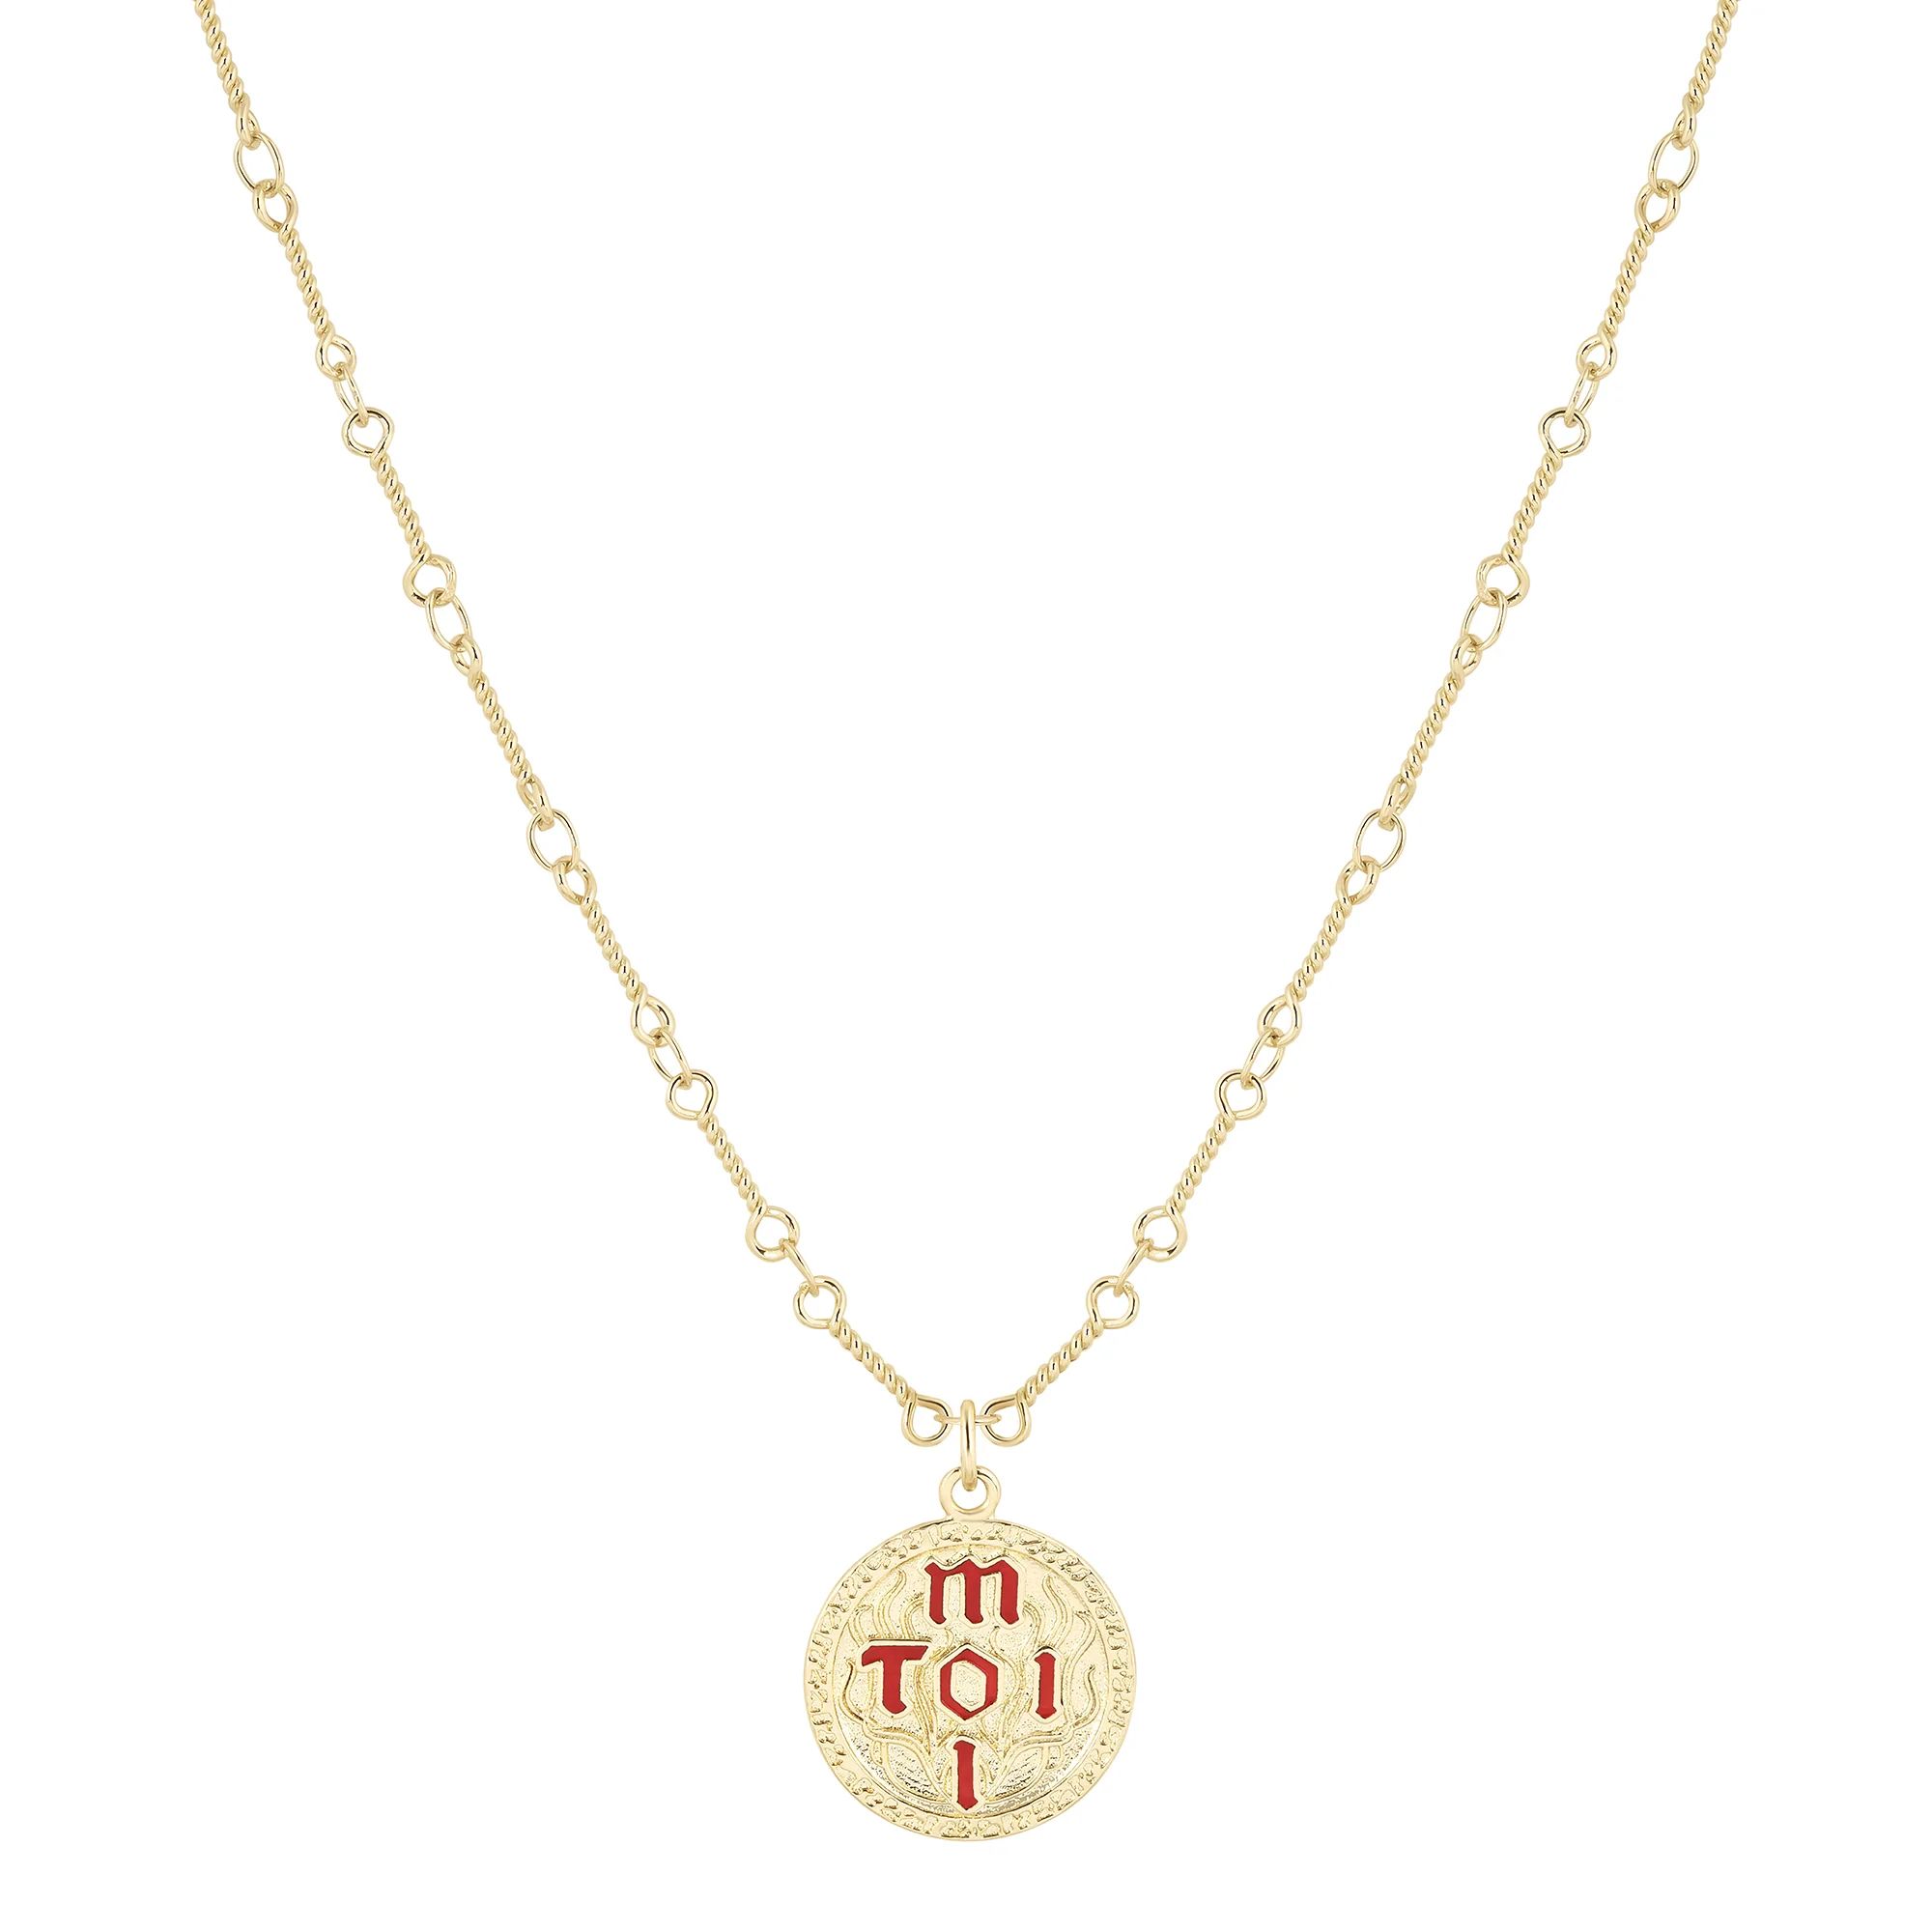 Me and You Necklace | Electric Picks Jewelry